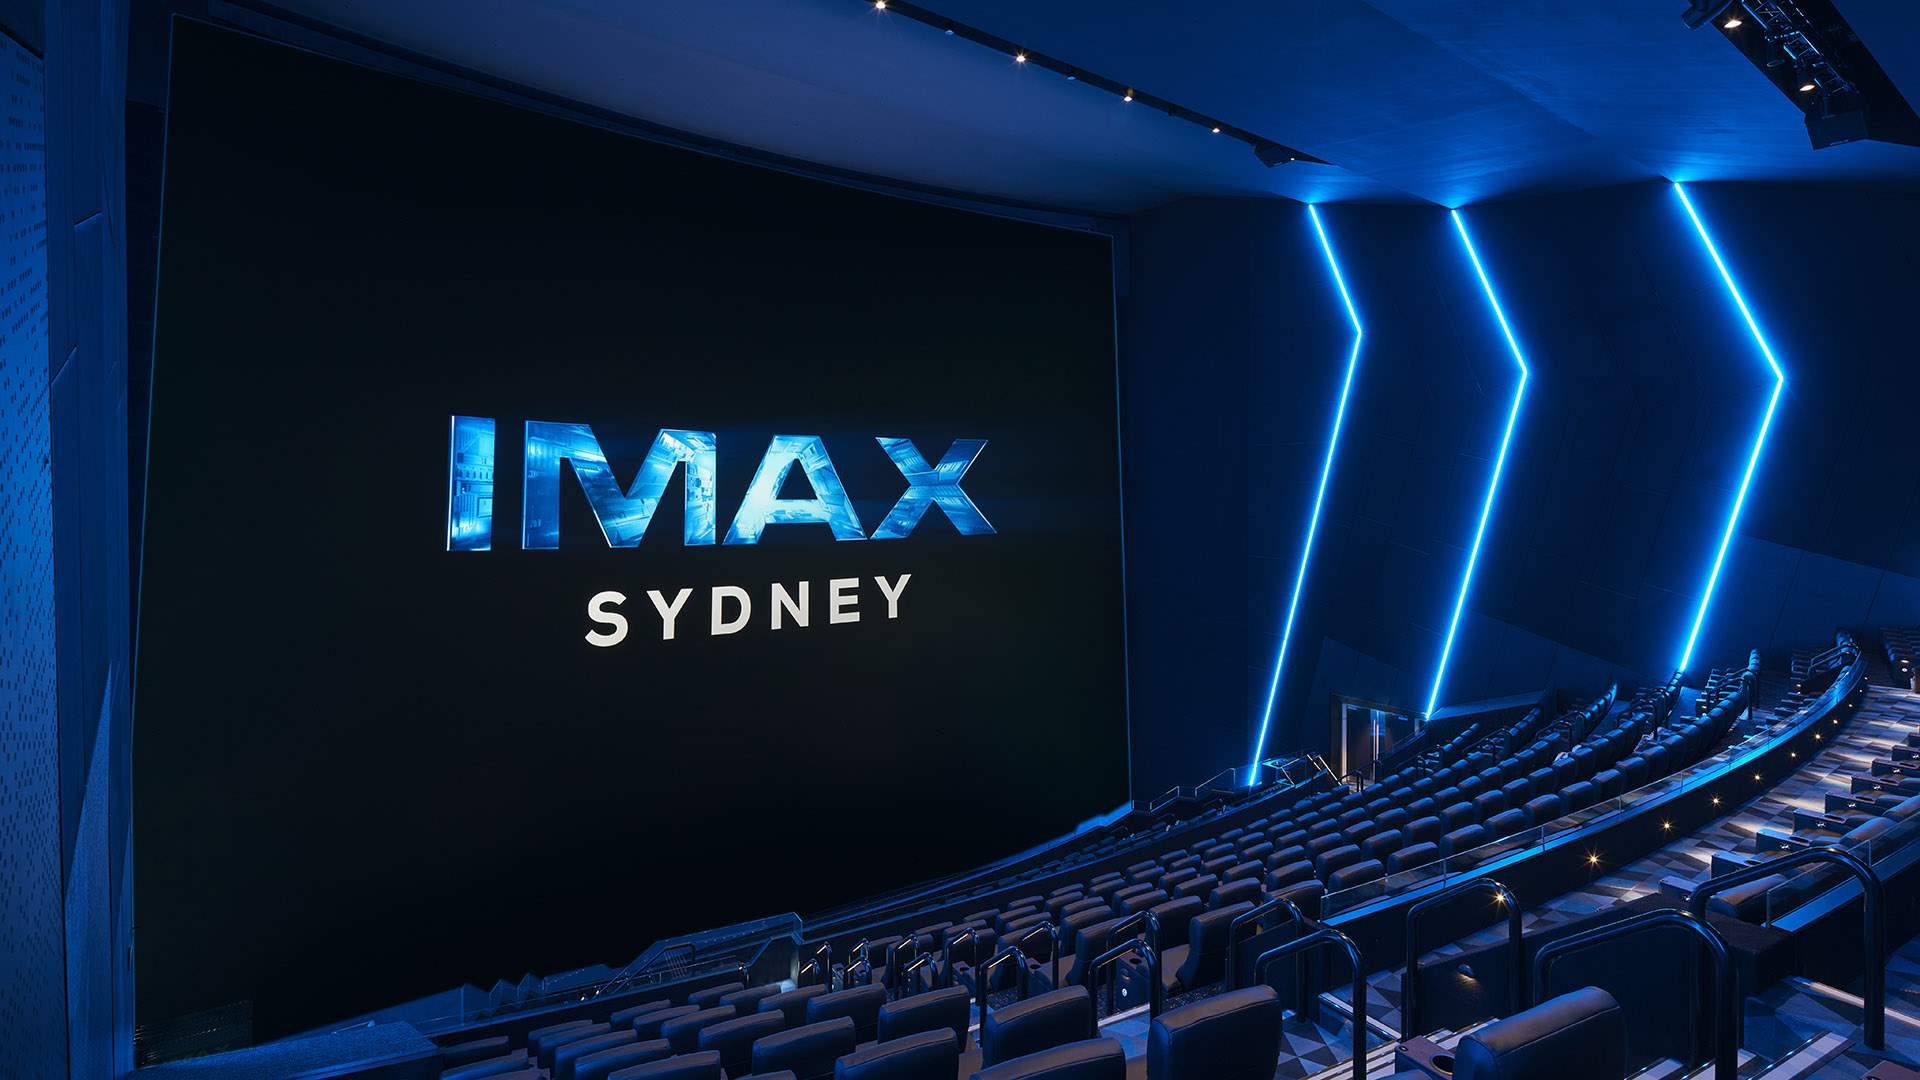 Literally Huge: Sydney's IMAX Is Finally Reopening with One of the Biggest Cinema Screens in the World